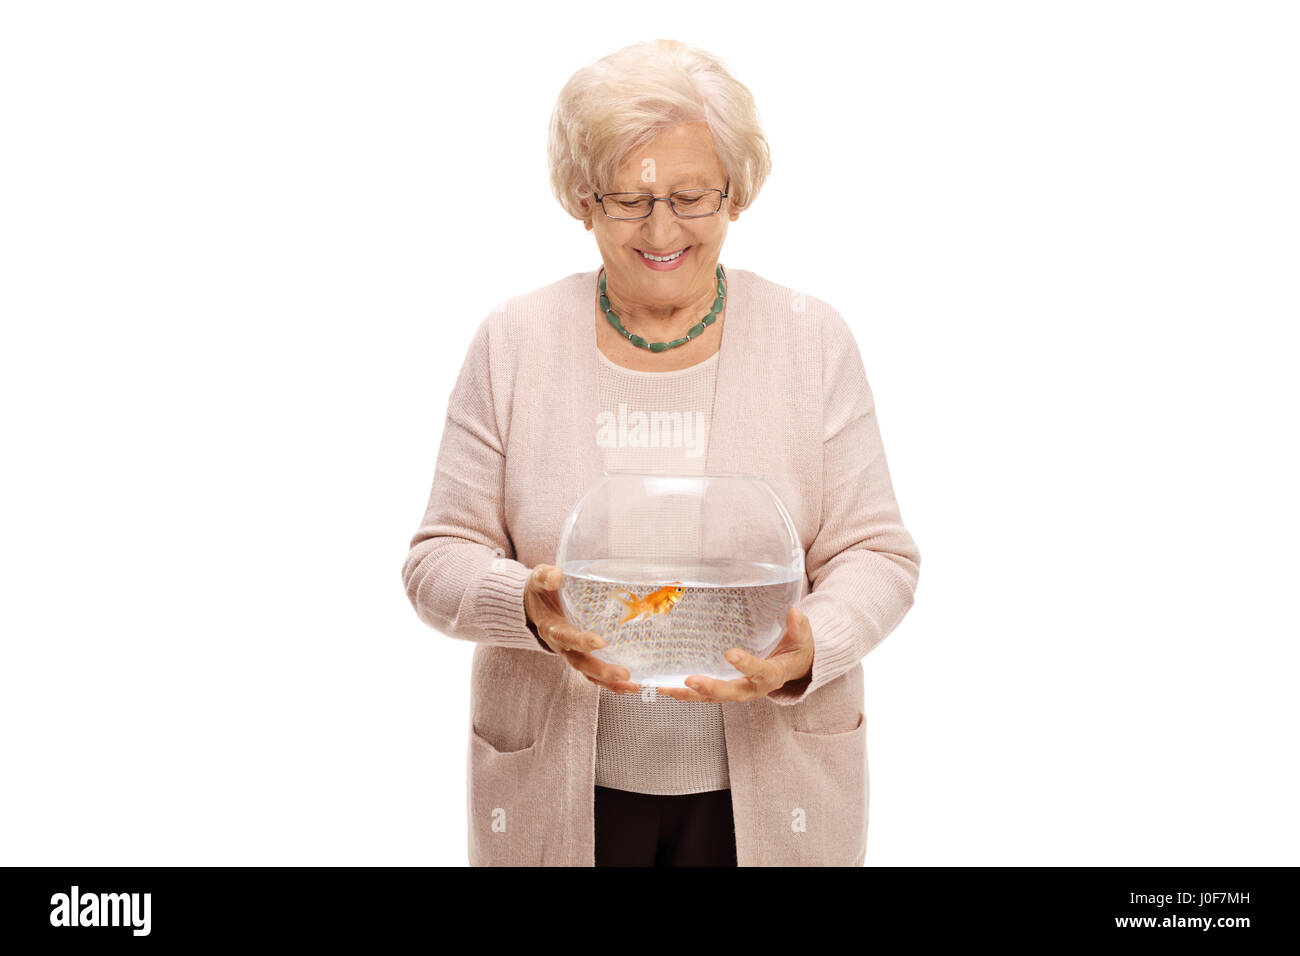 Mature woman holding a bowl with a goldfish isolated on white background Stock Photo